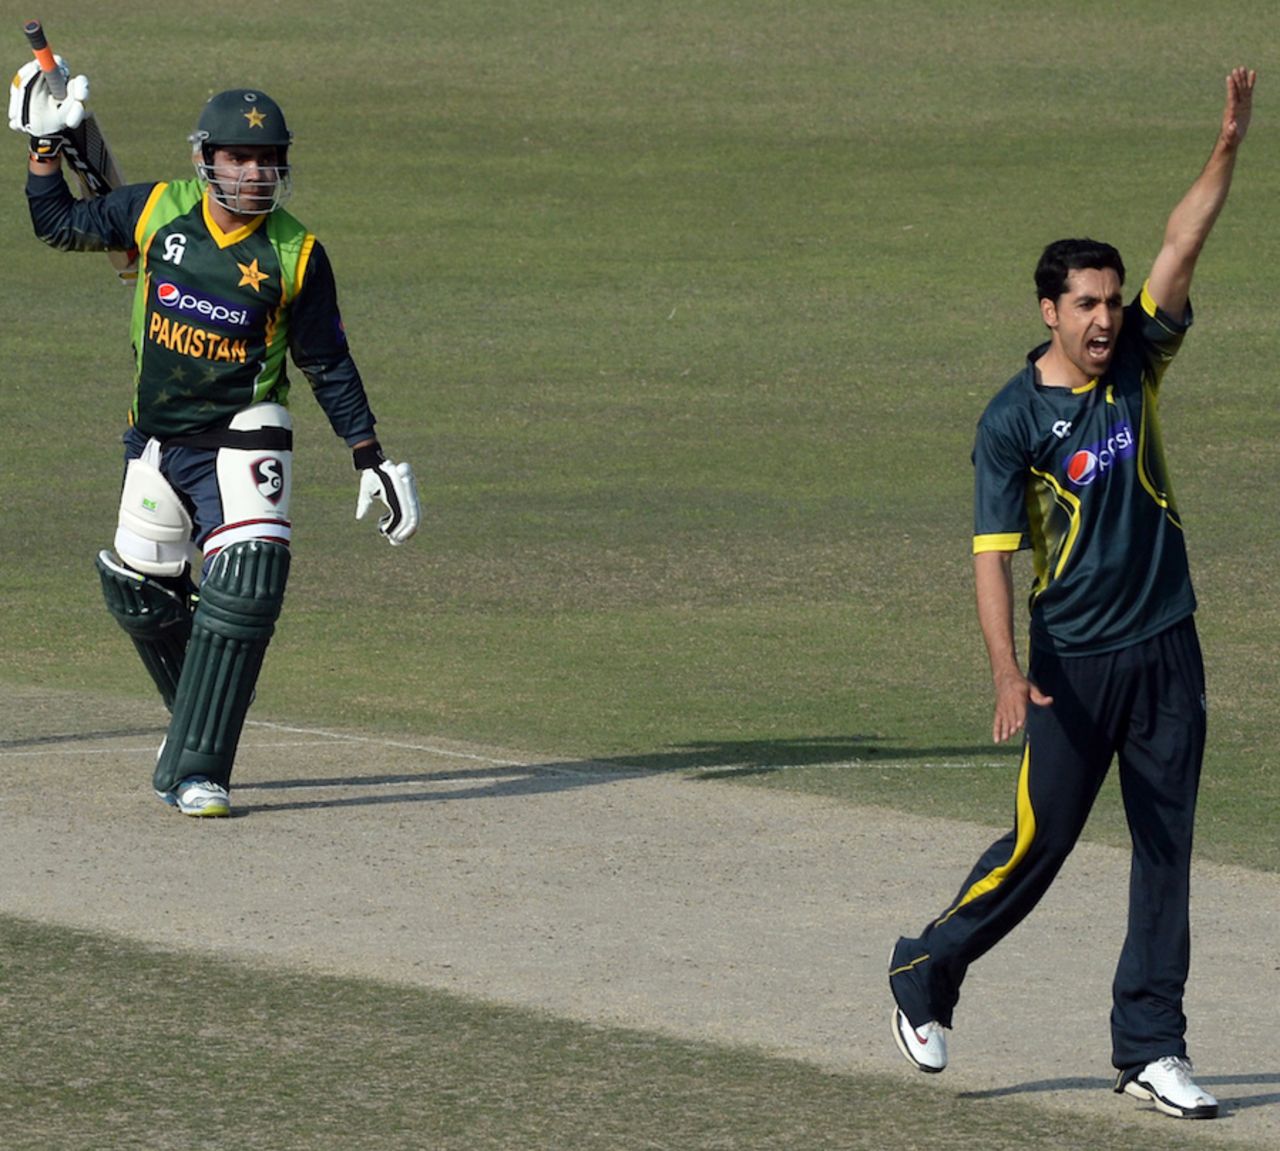 Umar Gul appeals against Umar Akmal during a practice match, Lahore, February 19, 2014